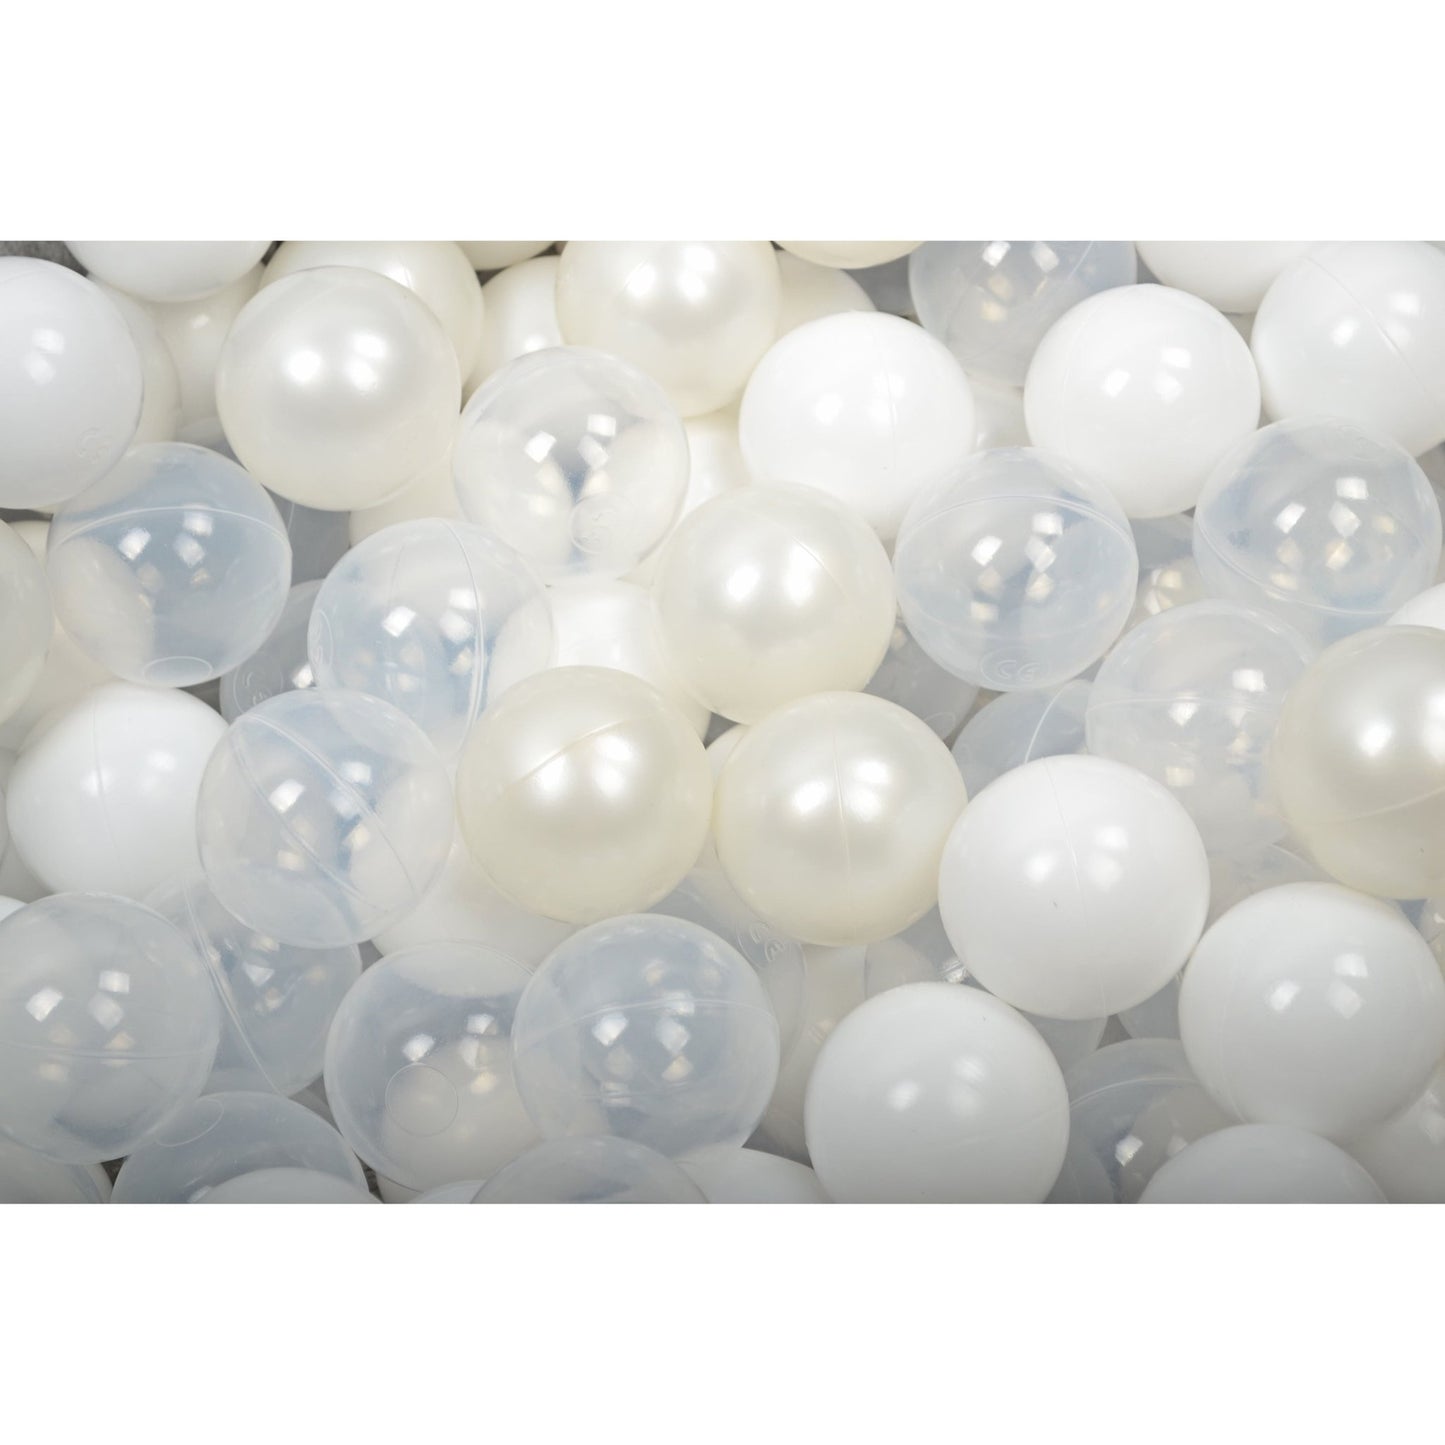 Fluffy White Boucle Round Foam Ball Pit - Select Your Own Balls